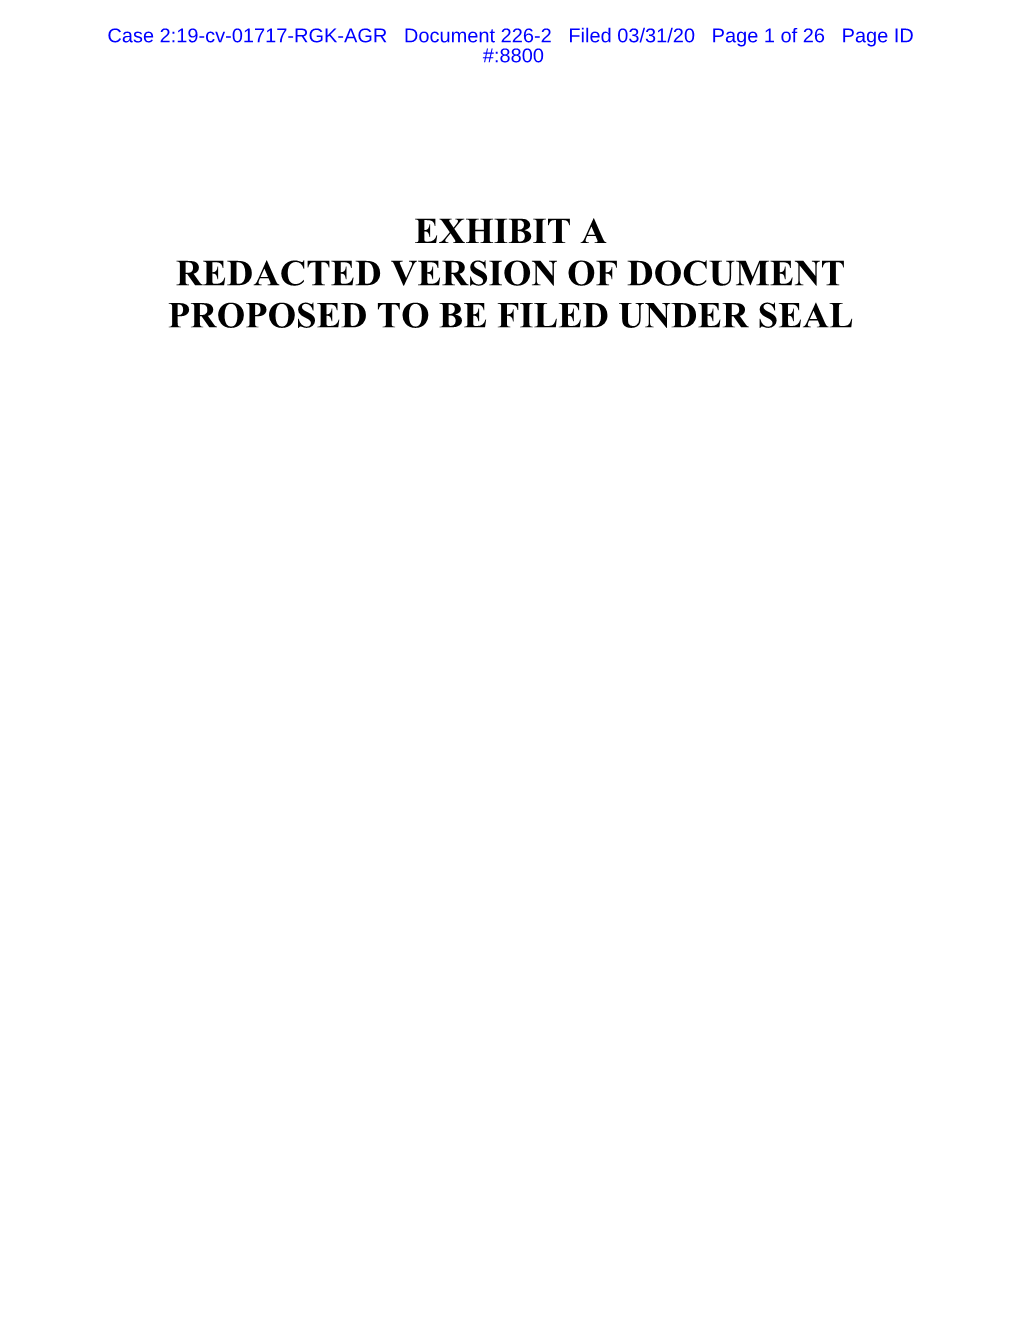 EXHIBIT a REDACTED VERSION of DOCUMENT PROPOSED to BE FILED UNDER SEAL Case 2:19-Cv-01717-RGK-AGR Document 226-2 Filed 03/31/20 Page 2 of 26 Page ID #:8801